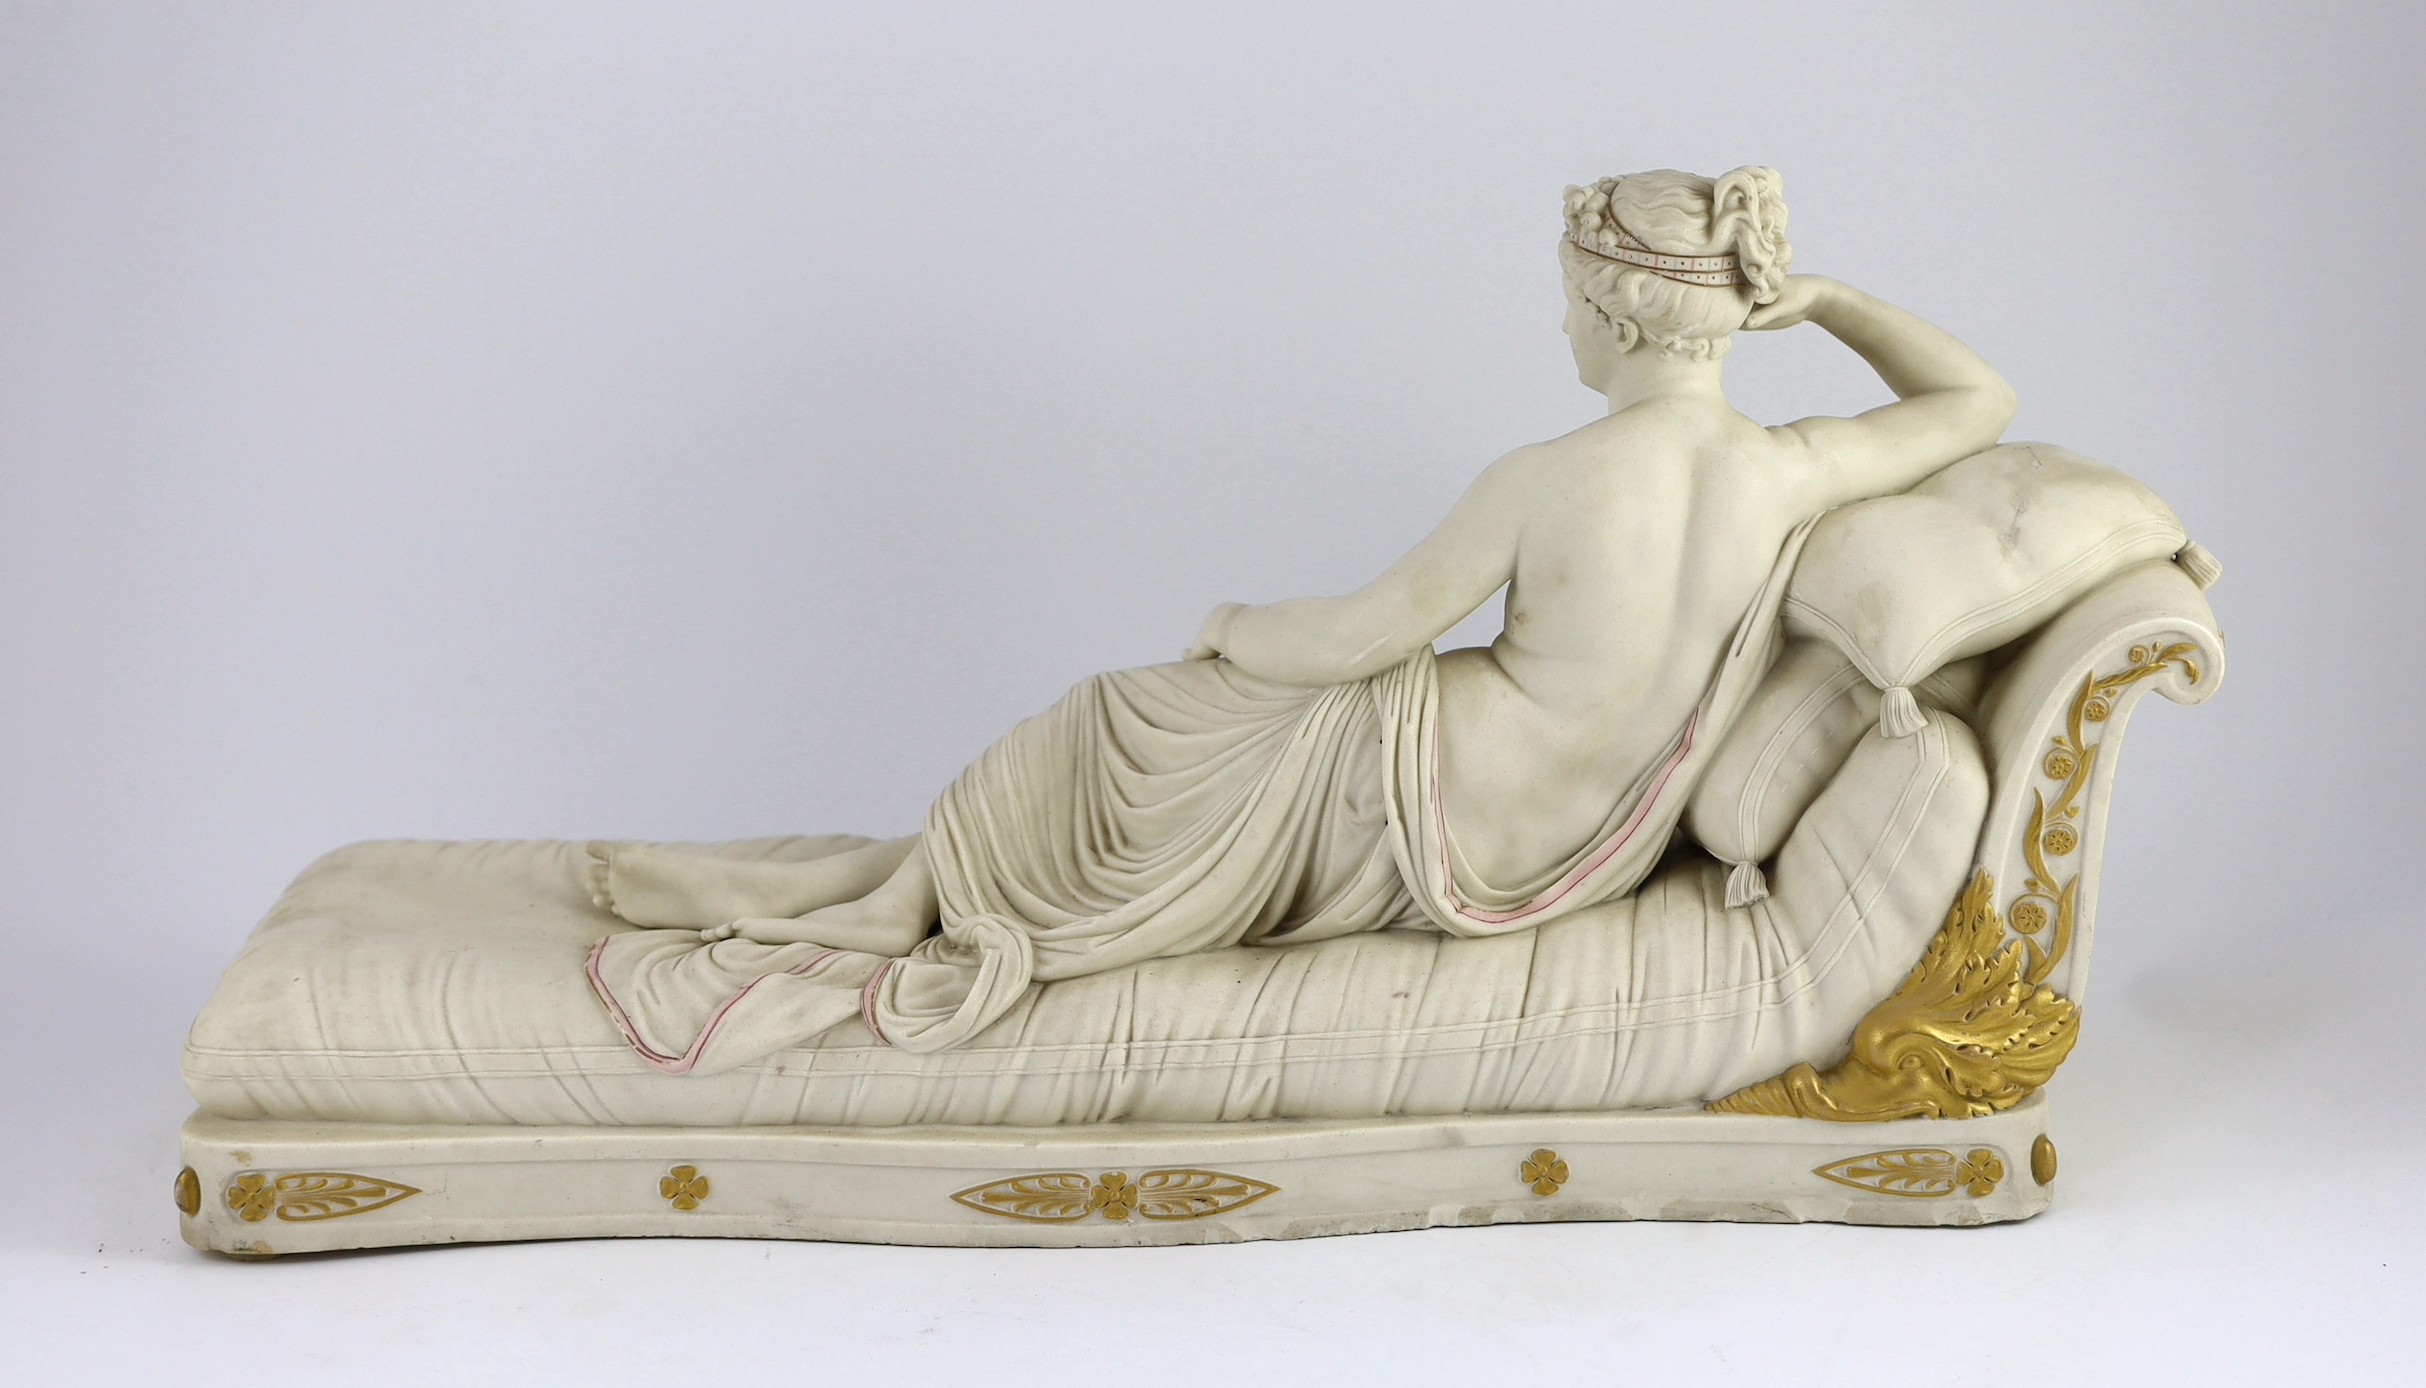 A Royal Worcester parian figure, after Antonio Canova, of Pauline Borghese as Venus Victorious, modelled by James Hadley, c.1866, 59.5cm long, some restoration to edge of base